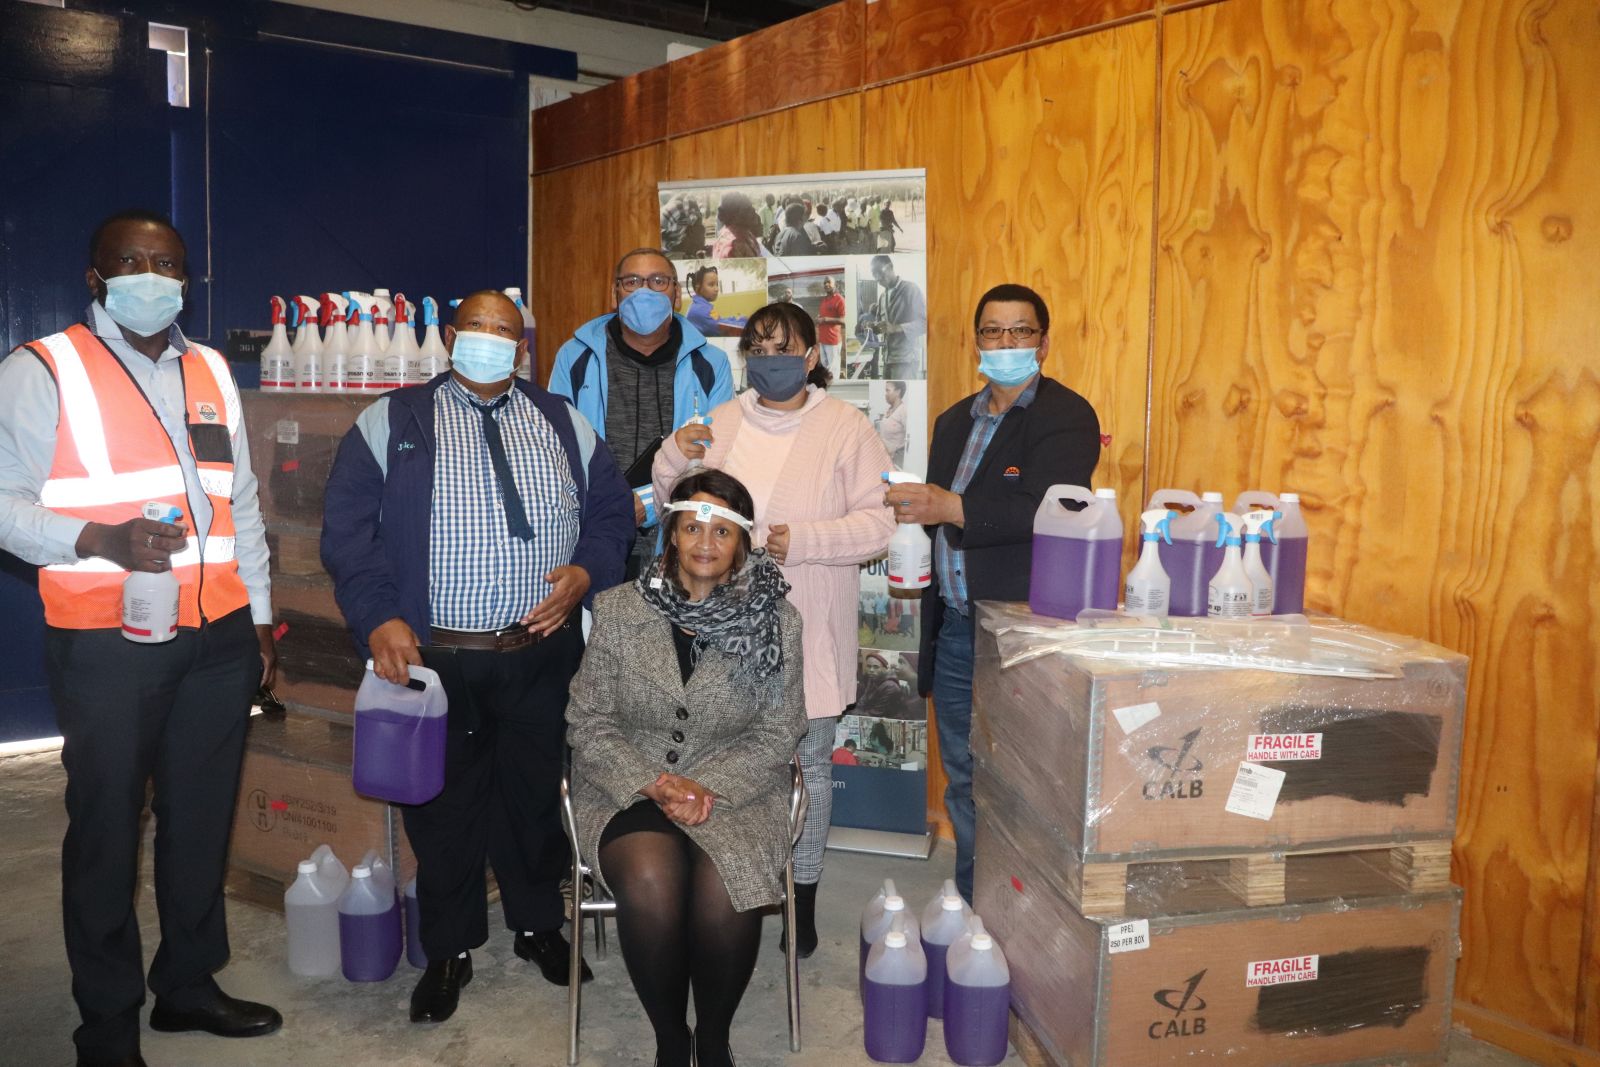 Pupils from Primary schools in Lüderitz, Hardap region  equipped with safety gear by the Namport Social Investment Fund